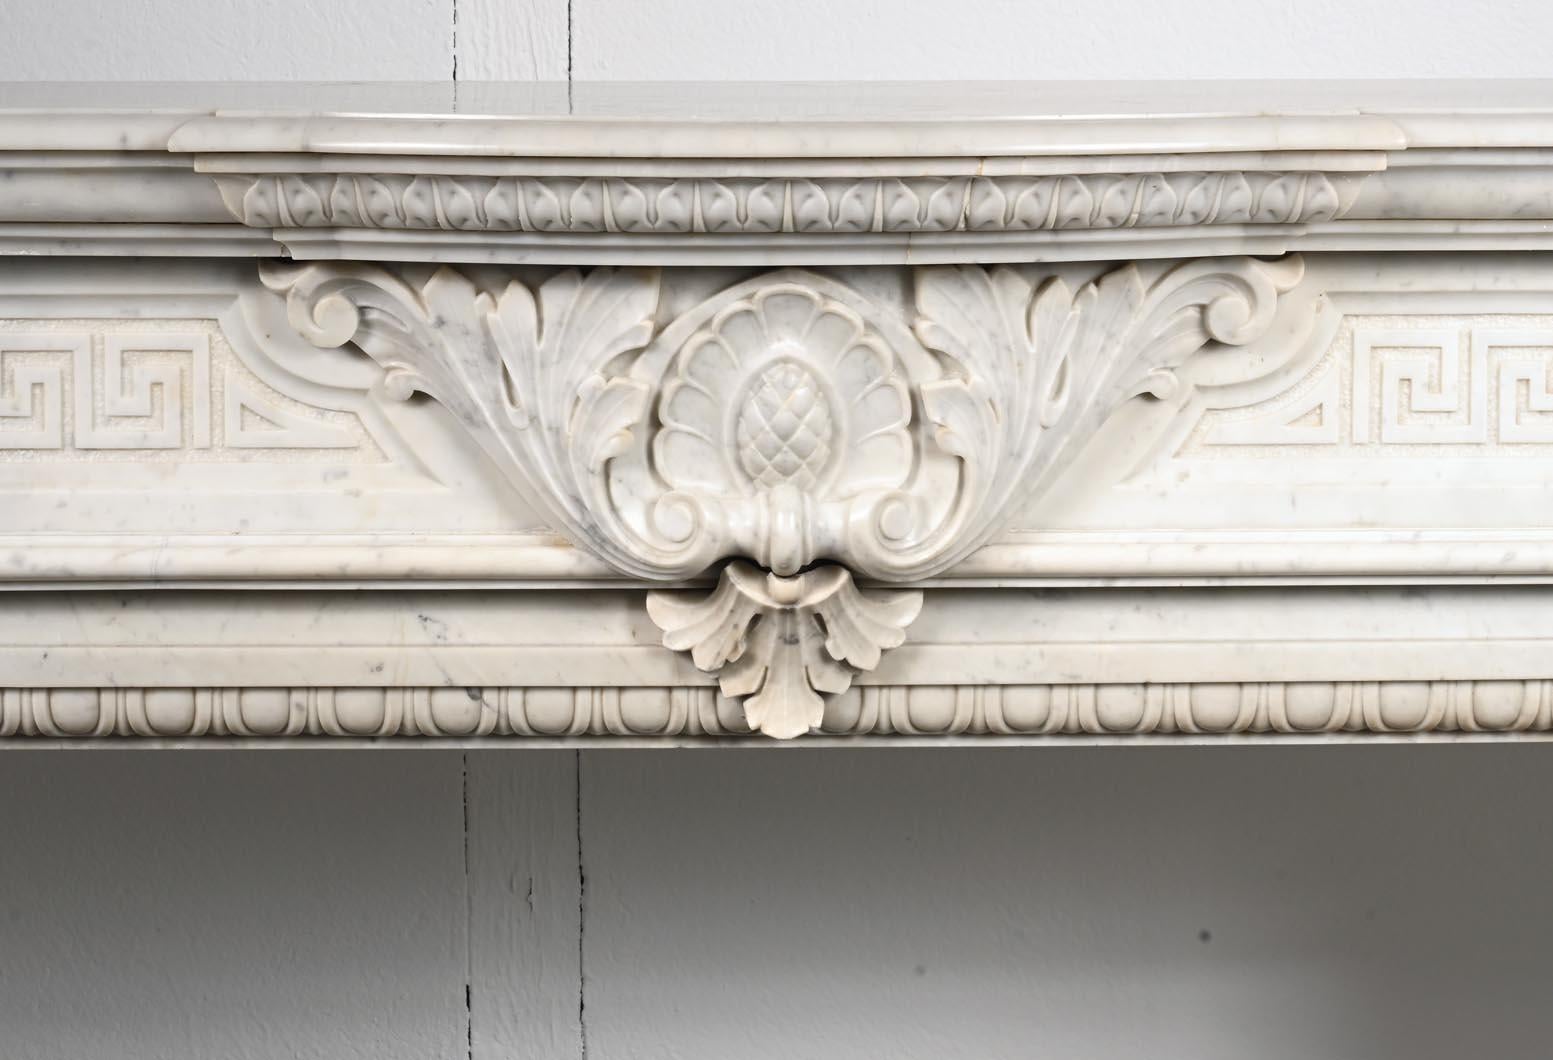 This Napoleon III style mantelpiece was created in Carrara marble in the 19th century. The centre of the lintel is adorned with a large plant pattern surrounding a stylized drawing of a flower. On both sides is a Greek frieze. The prominent